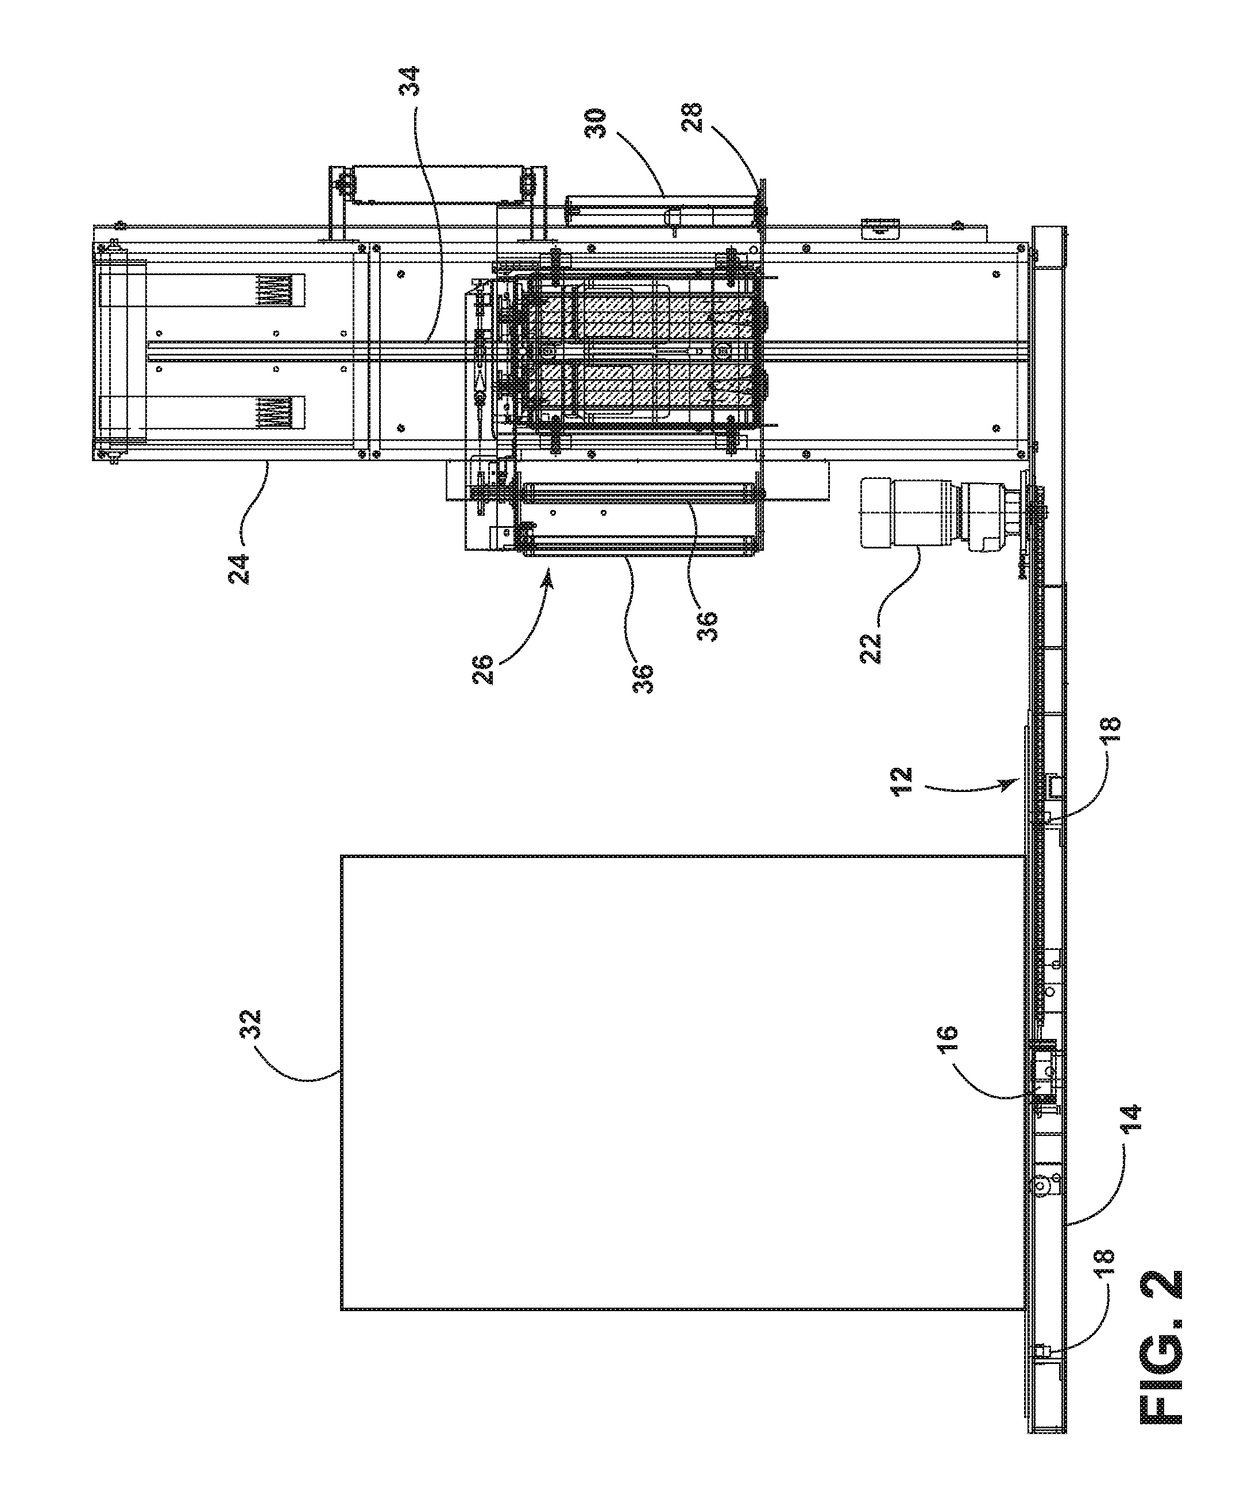 System and method of applying stretch film to a load